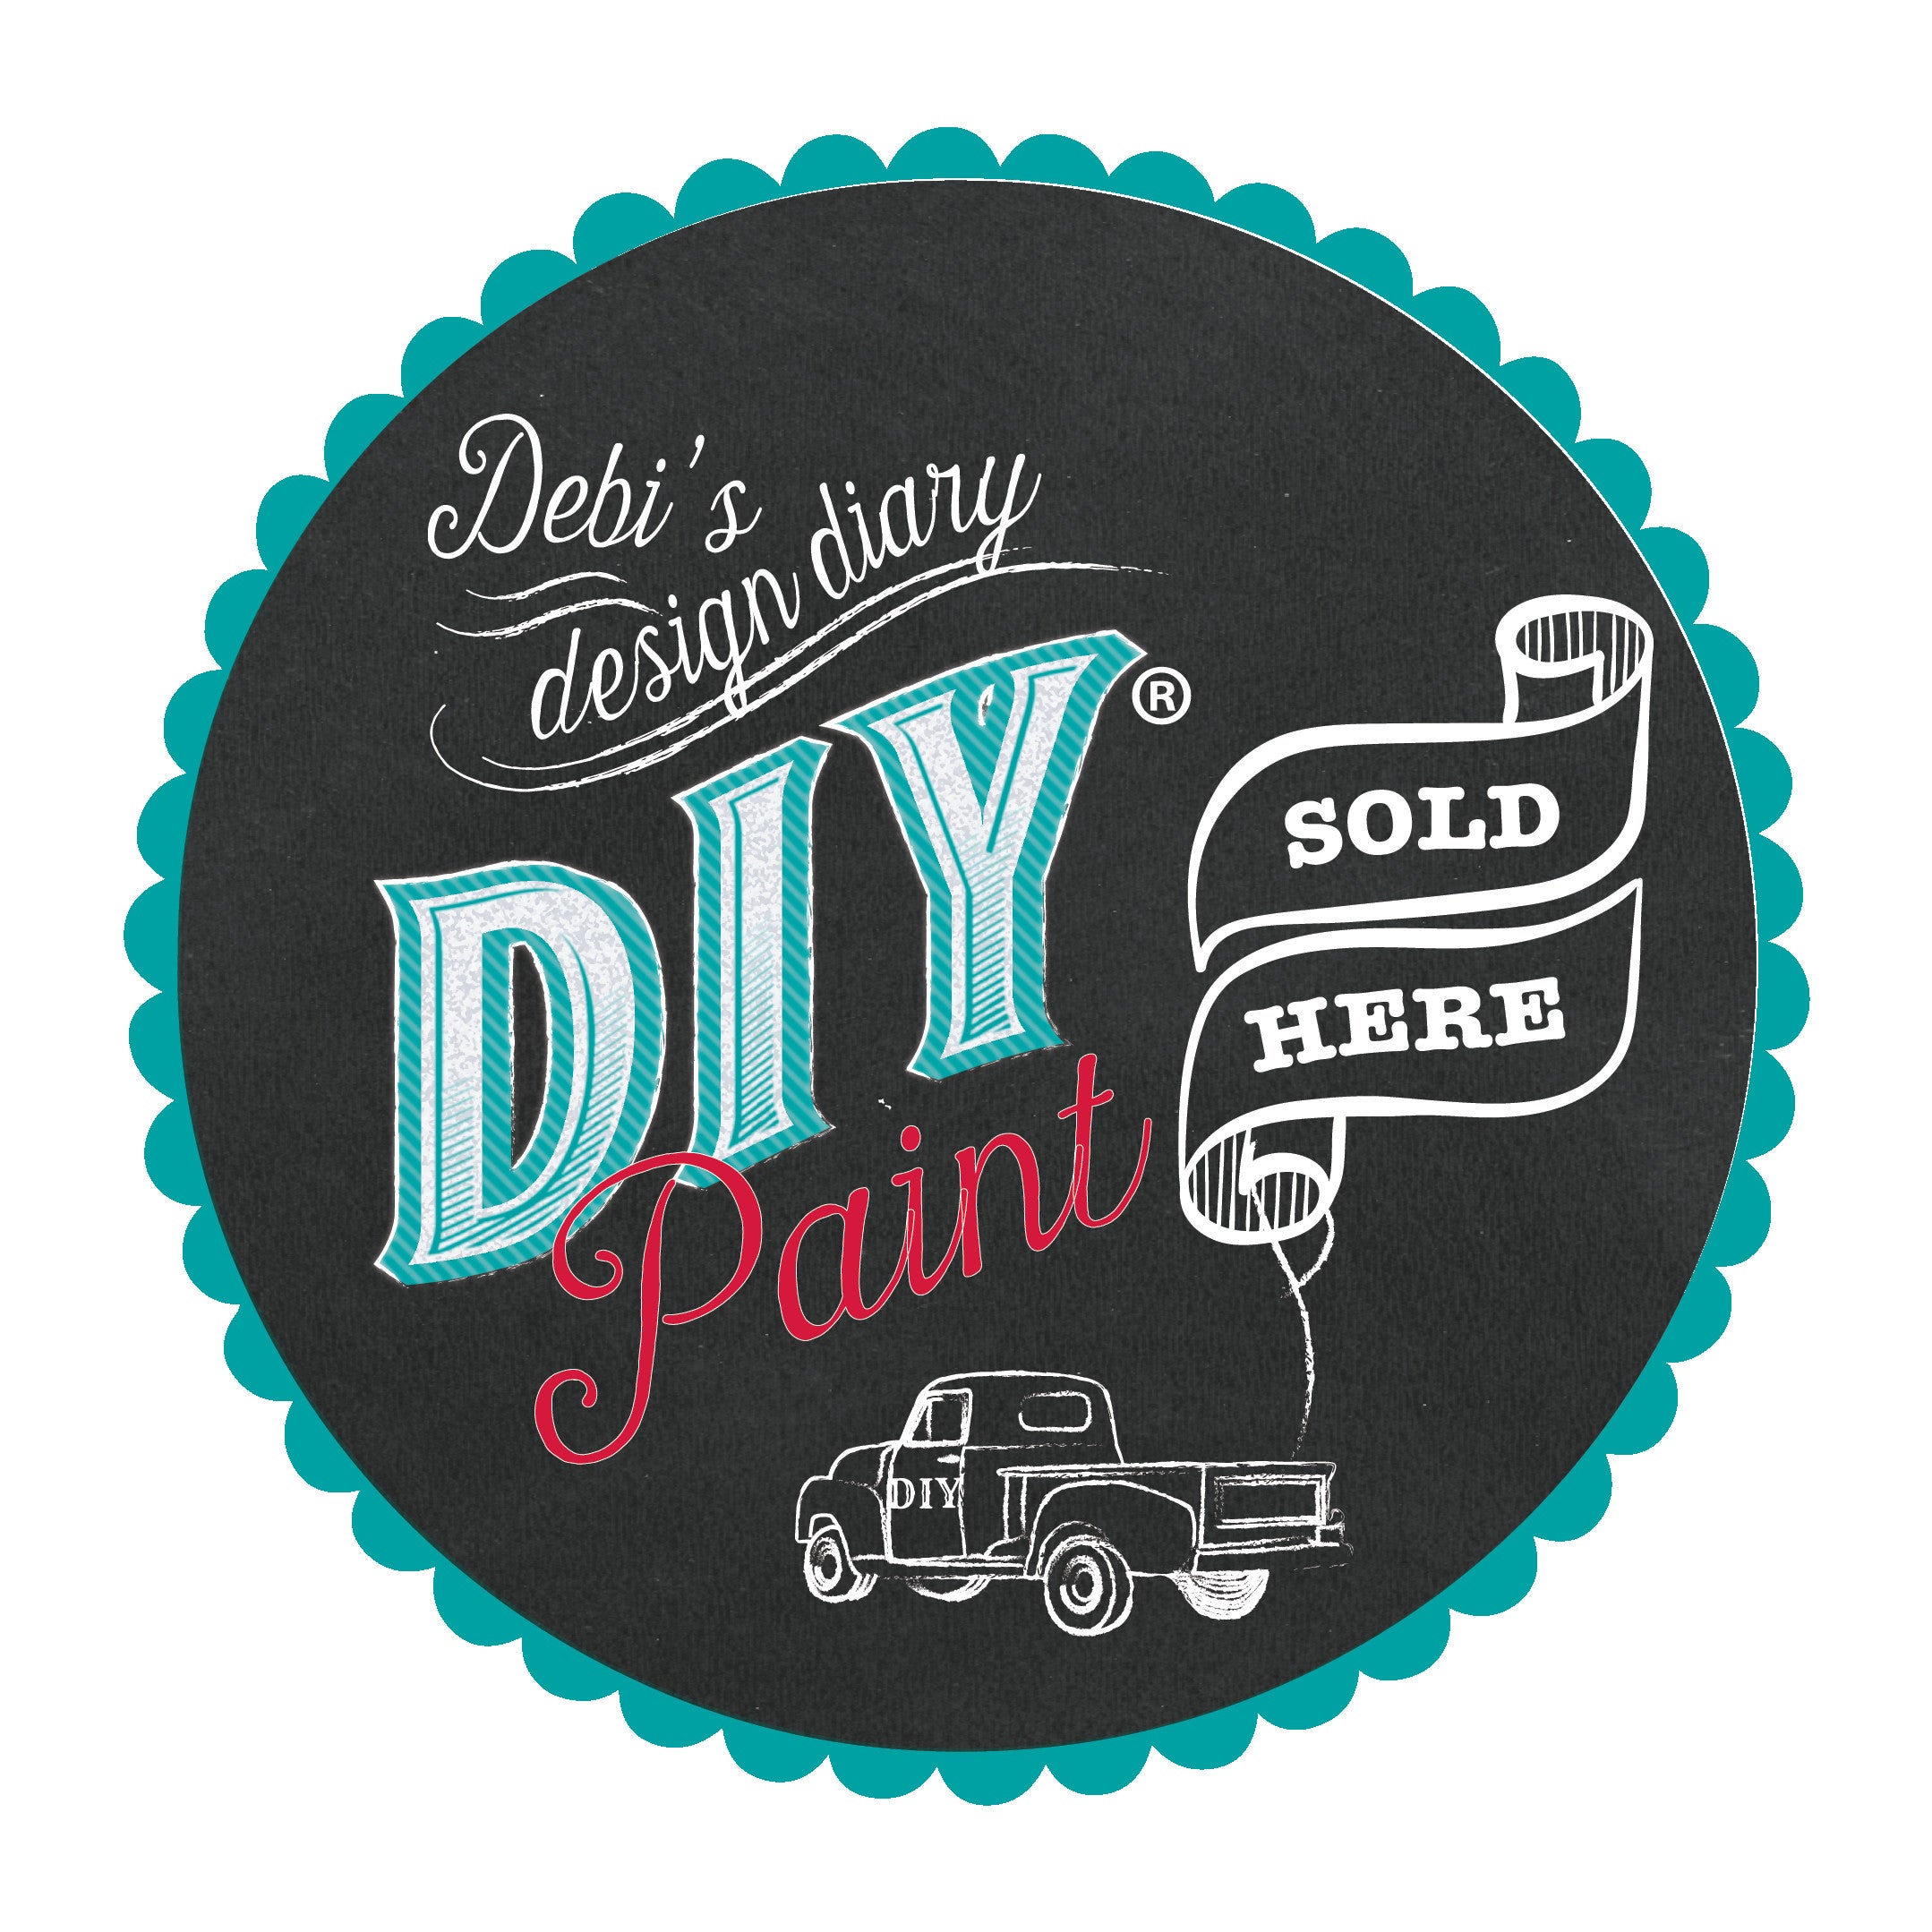 DIY: Making Clay Paint for your Home